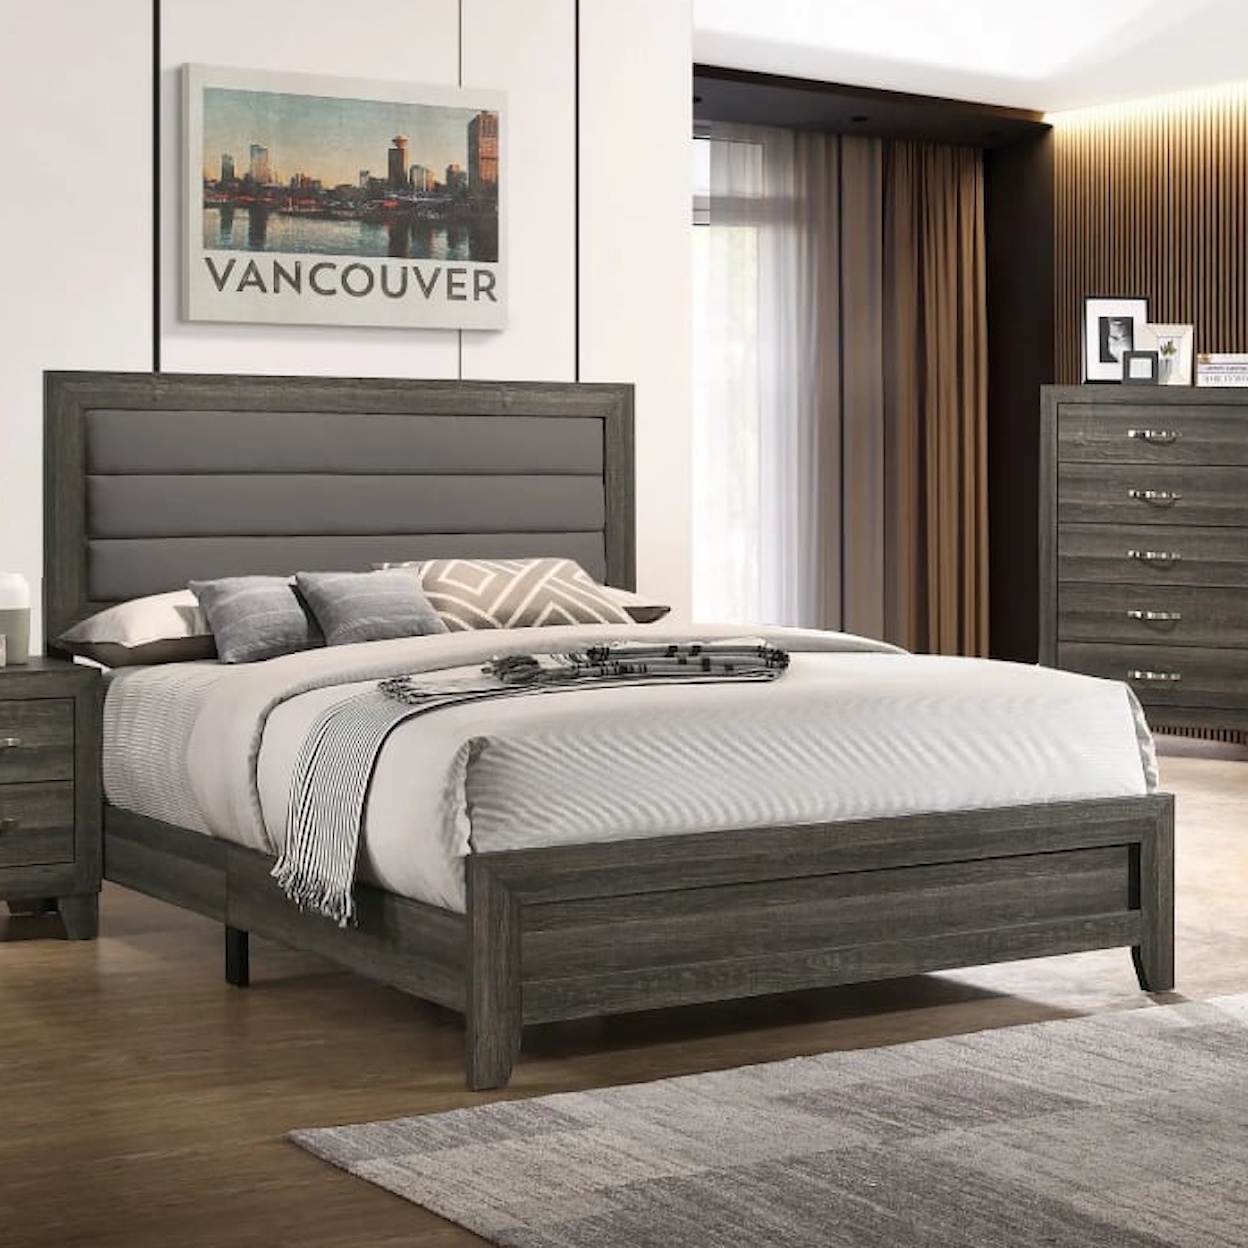 Furniture World Distributors Vancouver VANCOUVER GREY FULL BED |